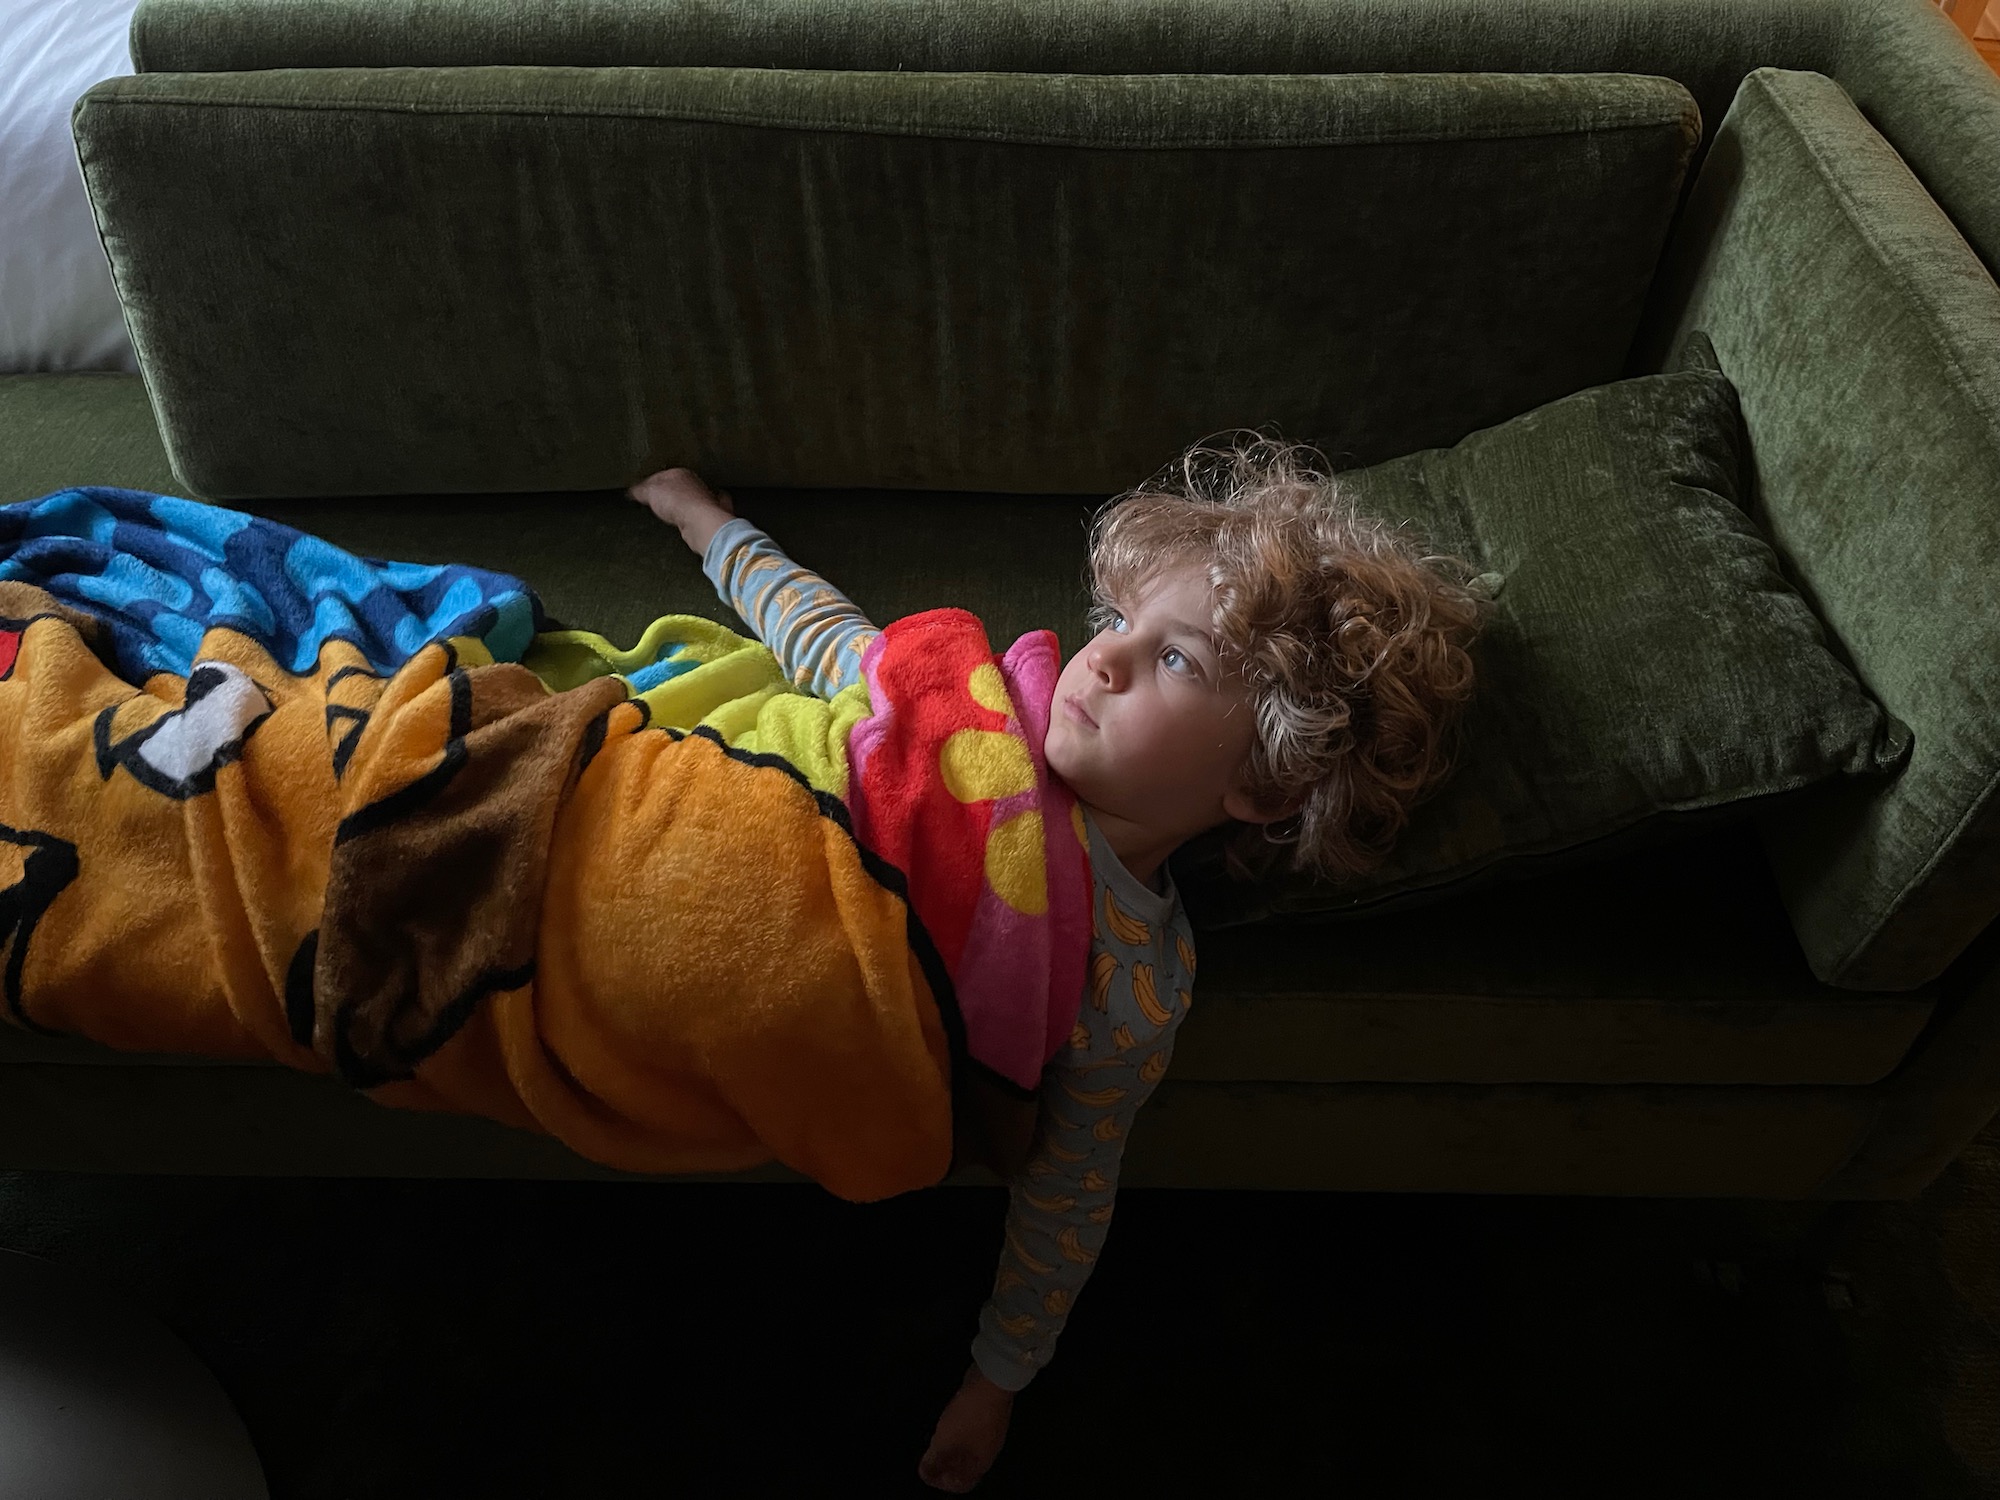 a child wrapped in a blanket lying on a couch